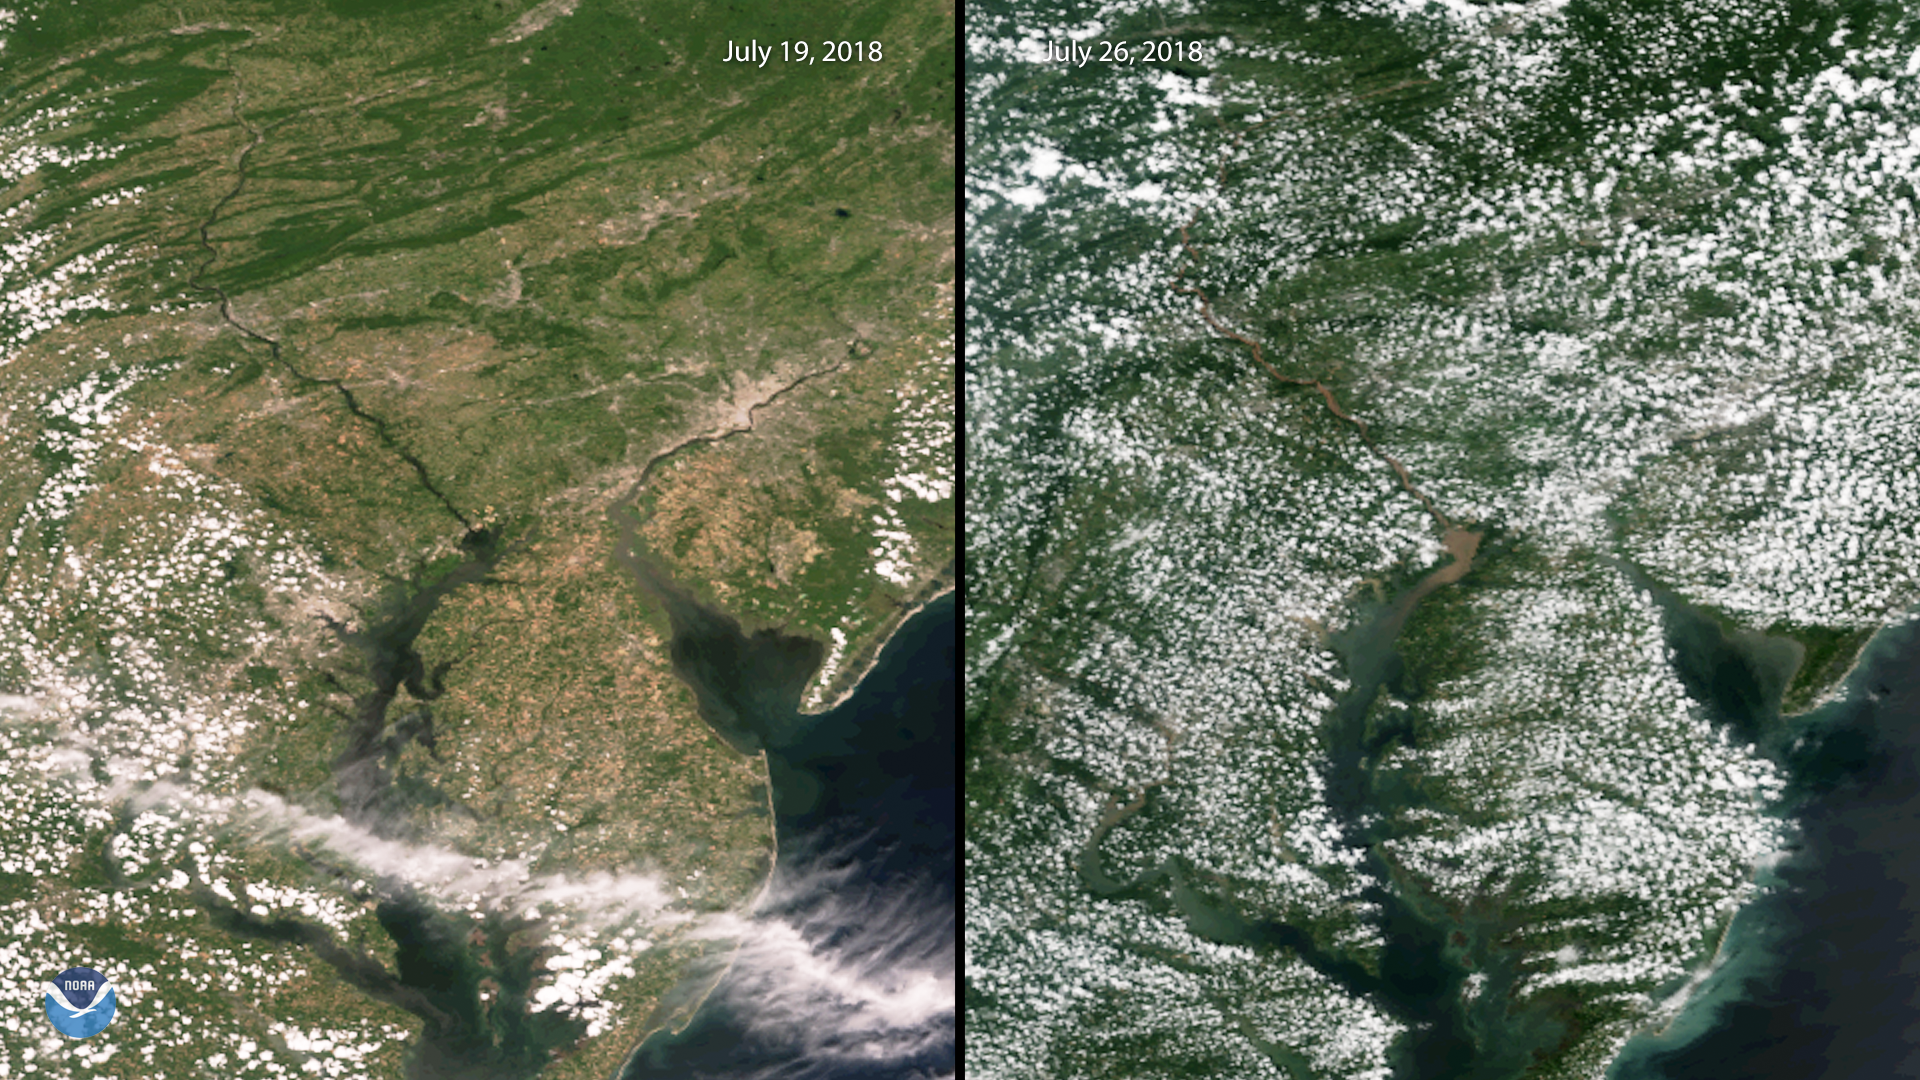 A side-by-side comparison of two images of the Chesapeake Bay, taken two weeks apart in July 2018. In the first, the Bay is deep blue and clear of sediment. In the second image, the mouth of the Bay and the river that feeds it are opaque brown, indicating the presence of large amounts of sediment.